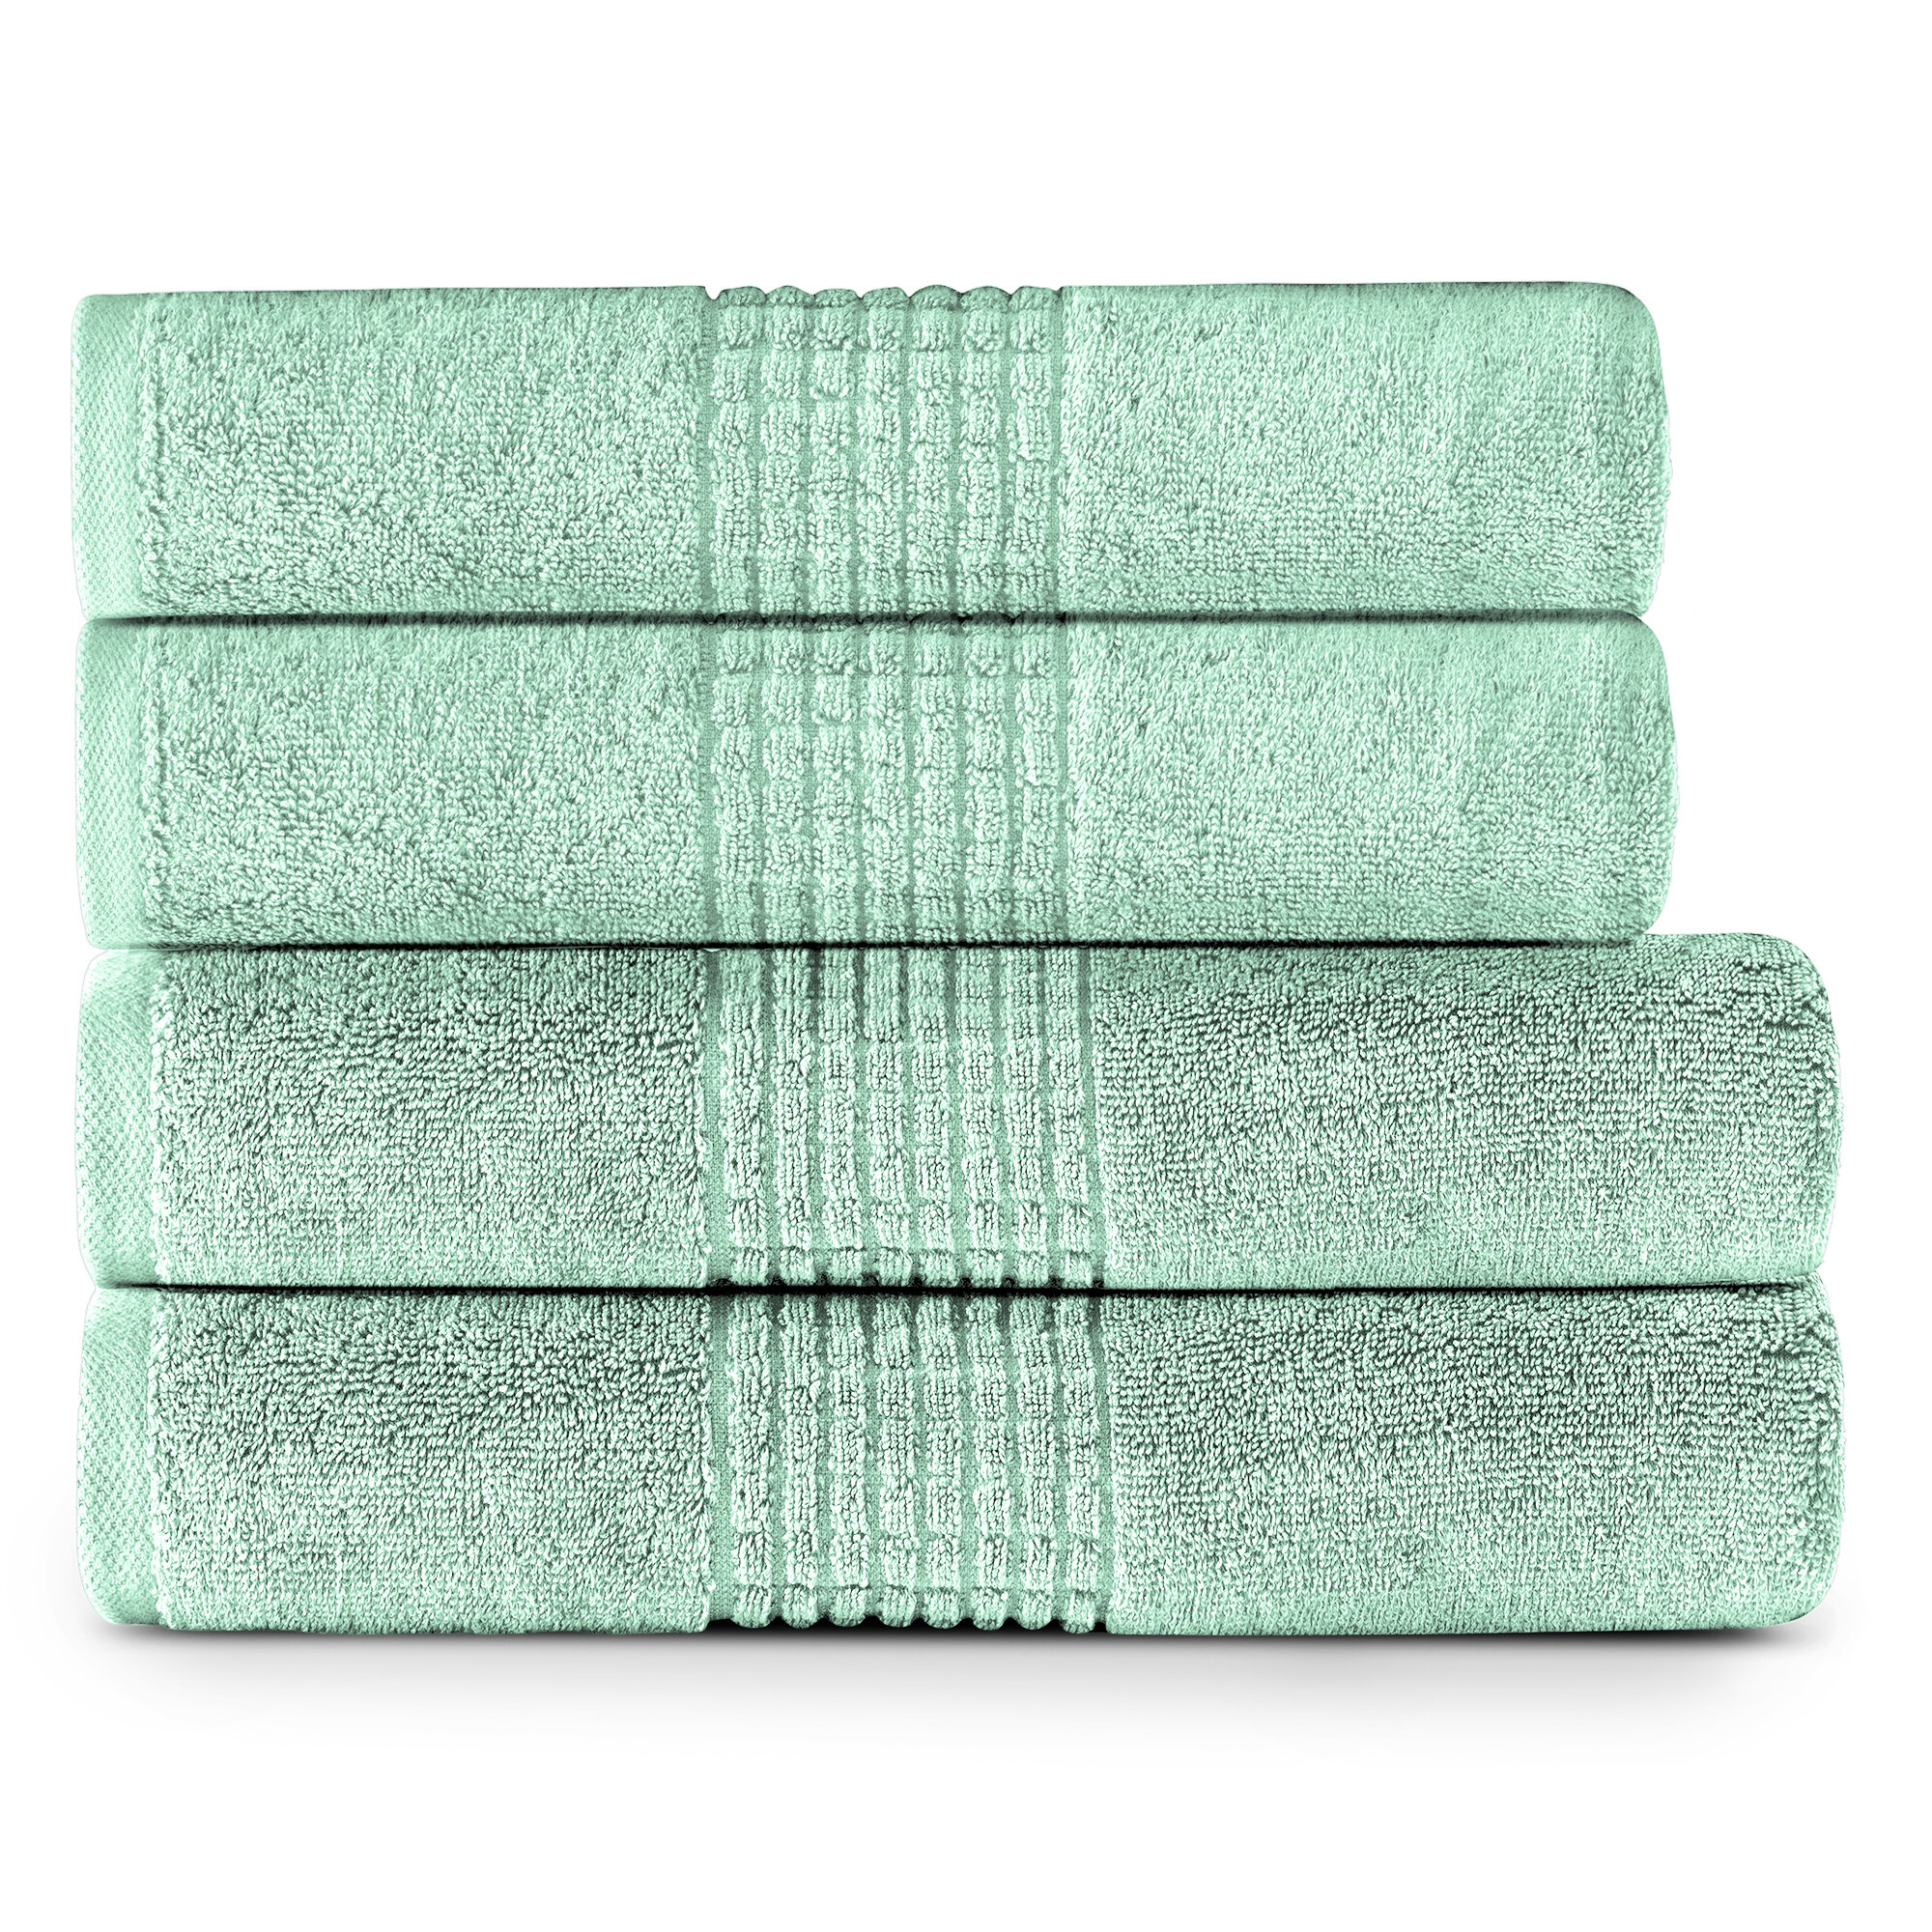 Luxury Spa Quality Mosaic Towels Set 100% Egyptian Cotton Towels Pack of 8, White - Lavish Touch 2 Bath Towels Heavy Weight 2 Hand and 4 Face Towels 700 GSM 2 Ply Cotton Plush 